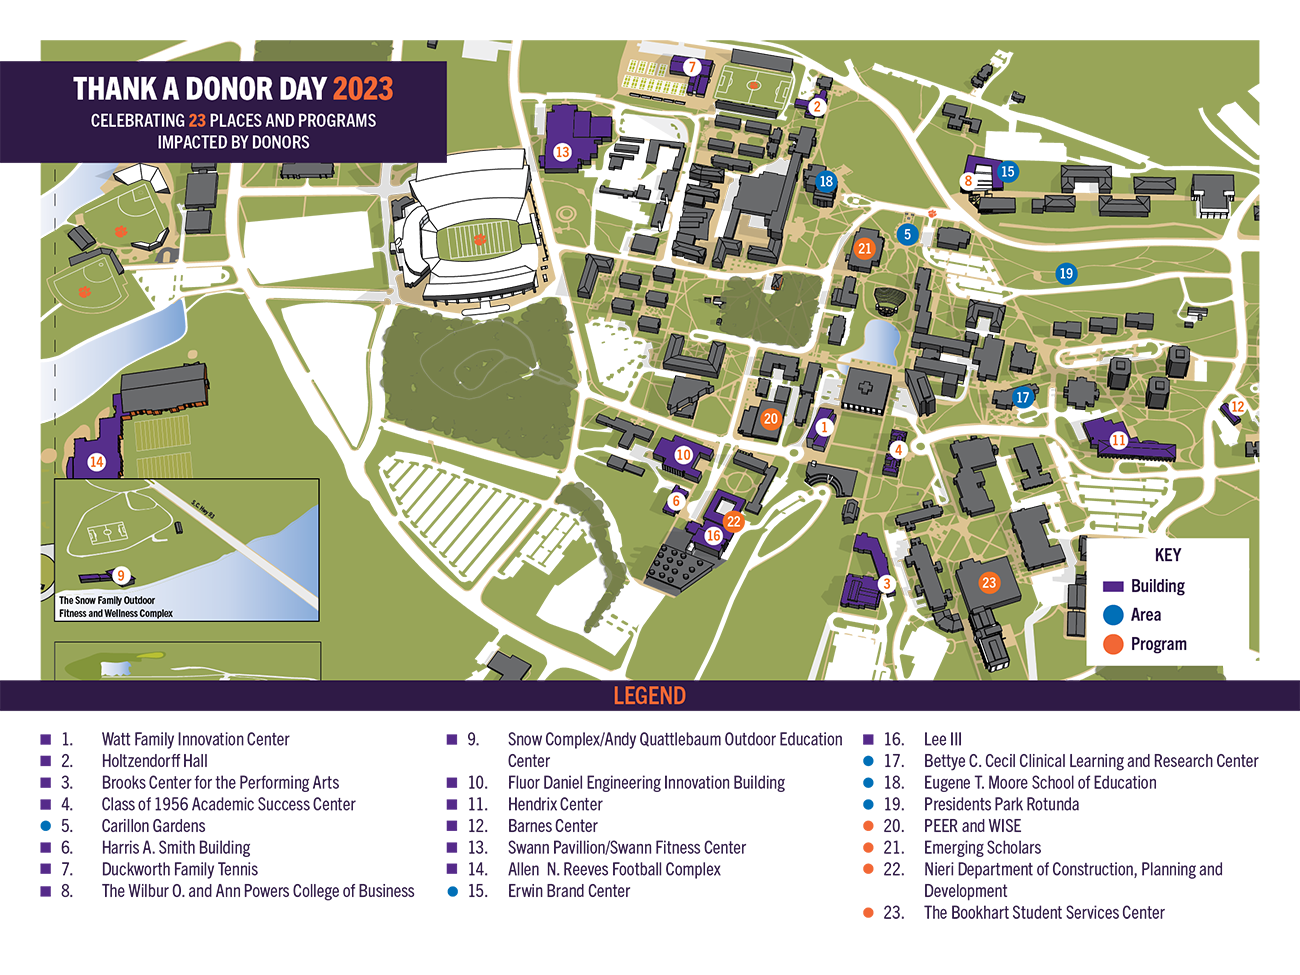 A map of Clemson's campus that indicates the buildings, areas, and programs that have received donations.